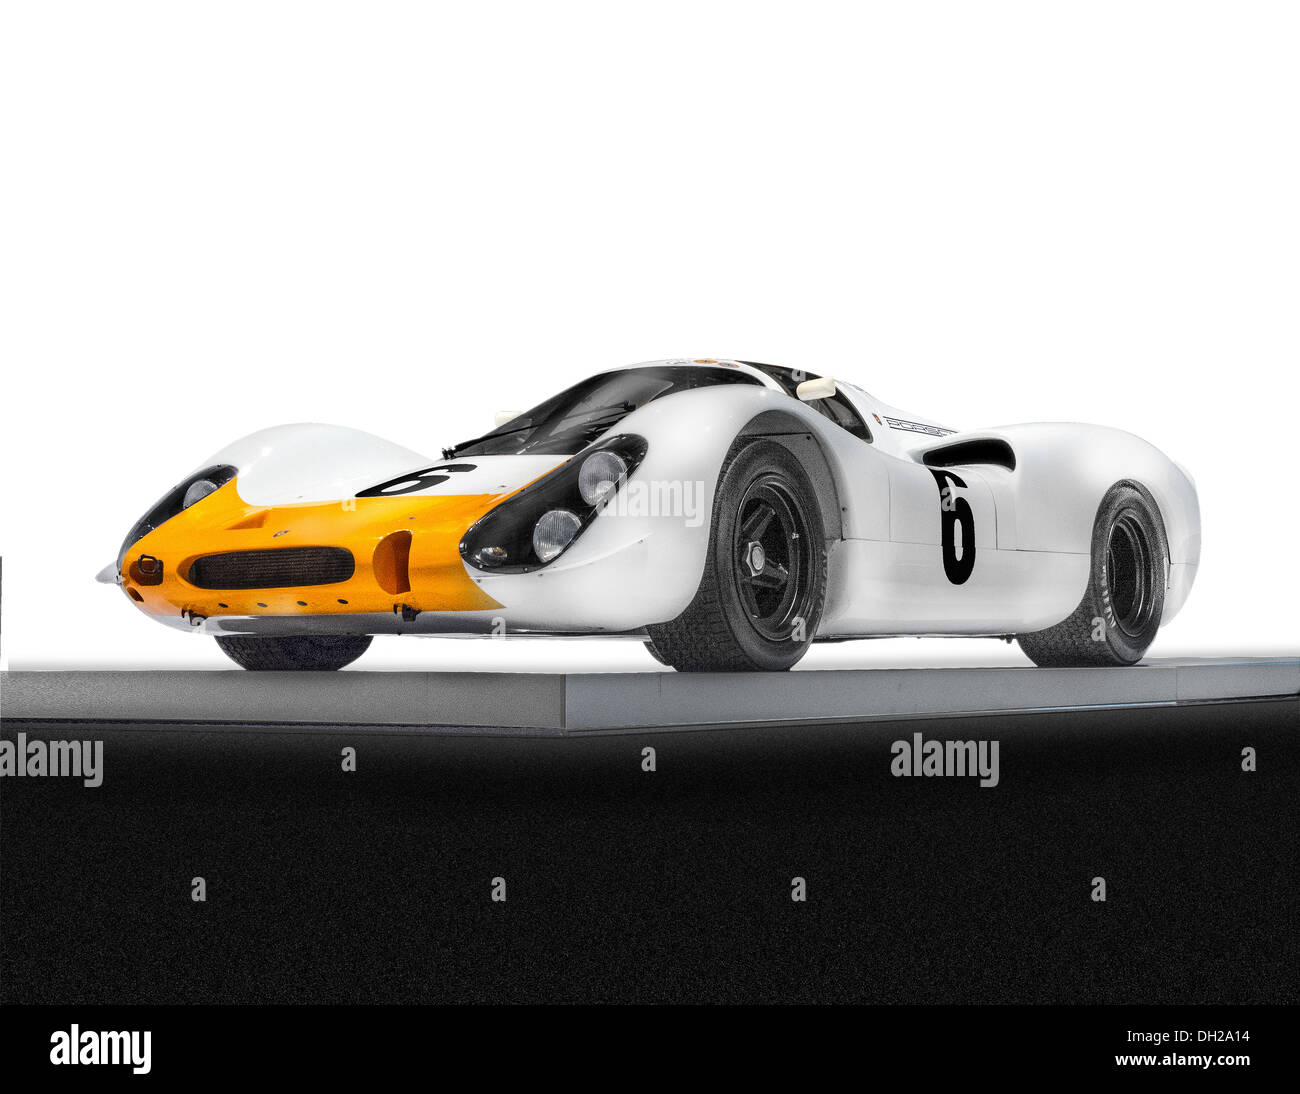 A dramatic side three quarter view of the 1968 Porsche Type 908 K prototype  Le Mans race car Stock Photo